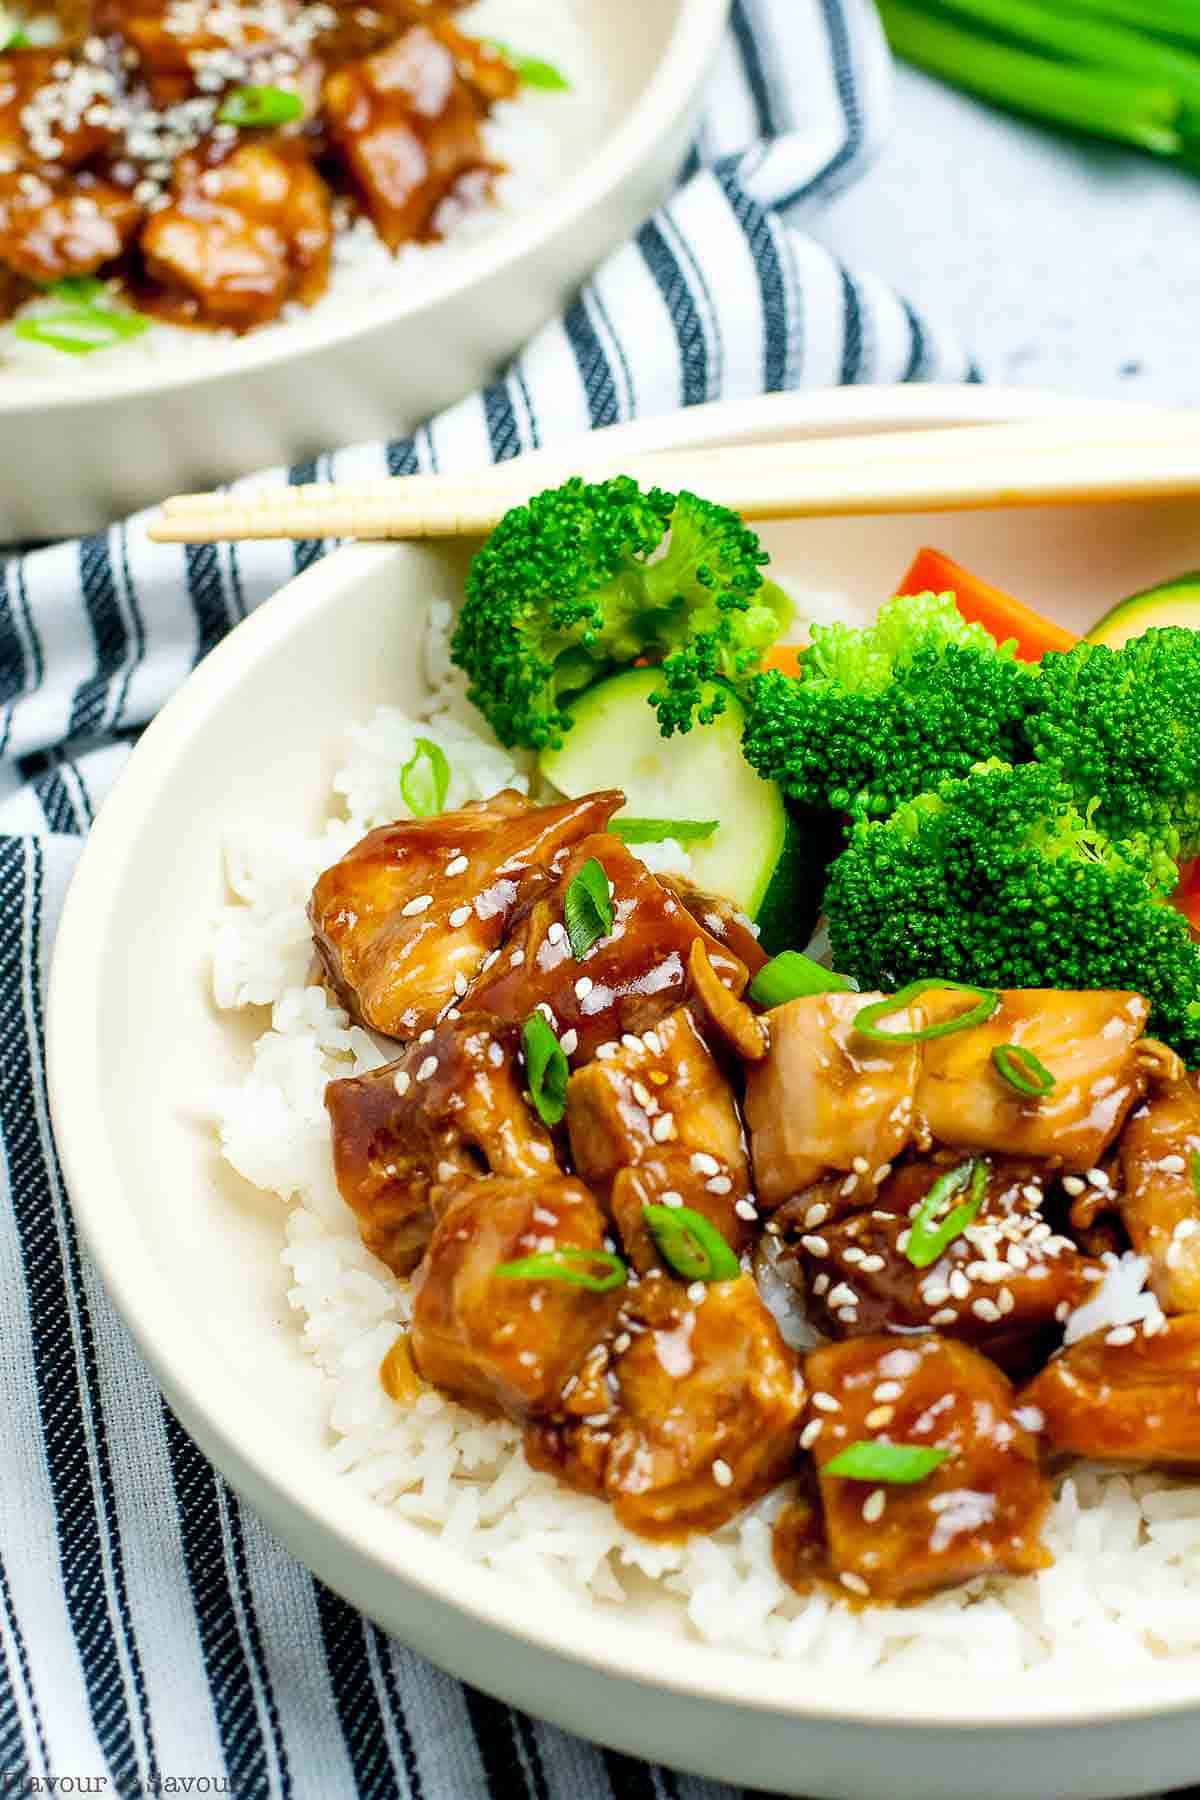 Teriyaki chicken rice bowls with broccoli, carrots and zucchini.